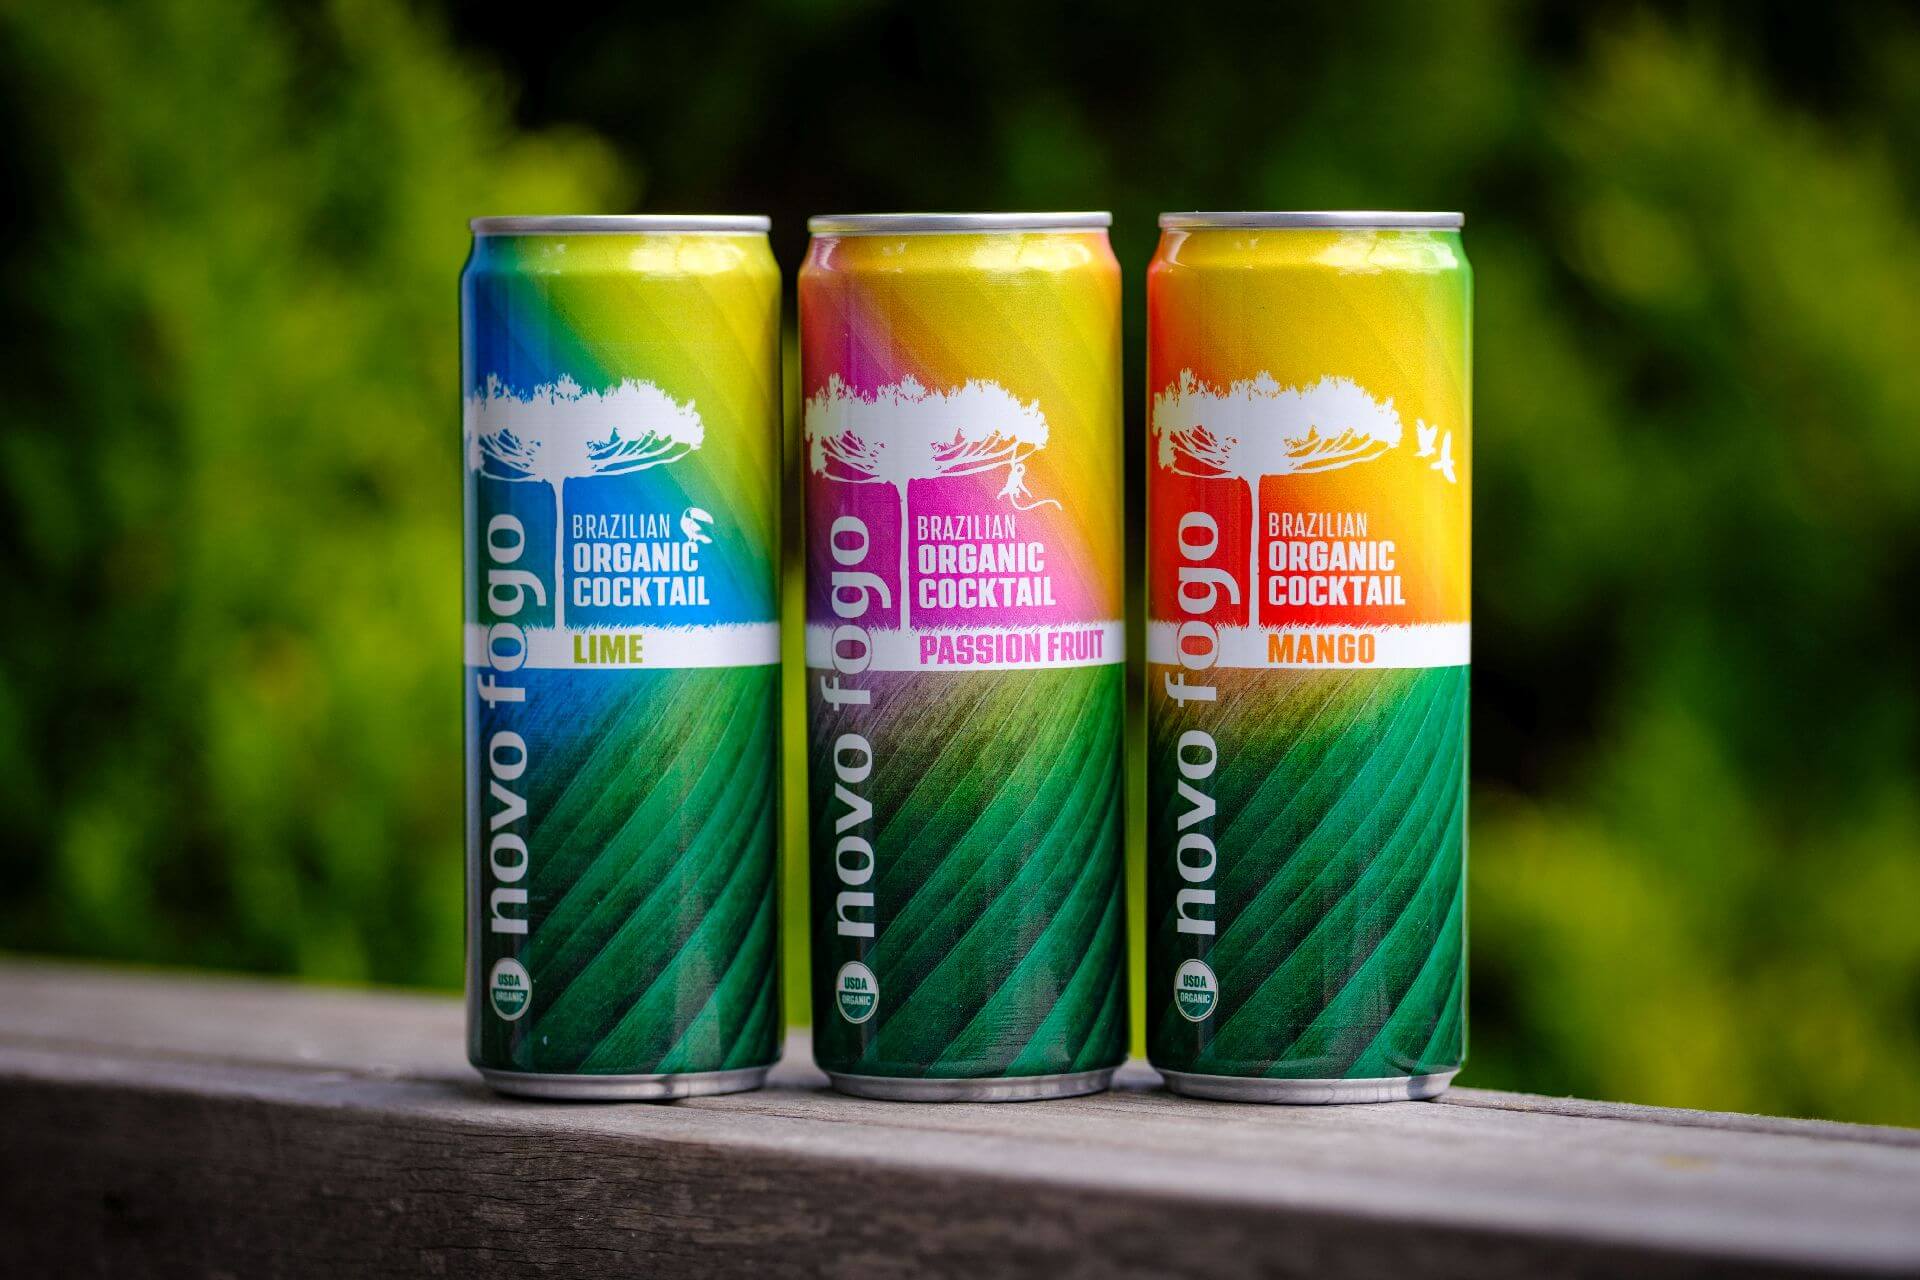 Redesigned and reformulated Novo Fogo ready-to-drink canned cocktails